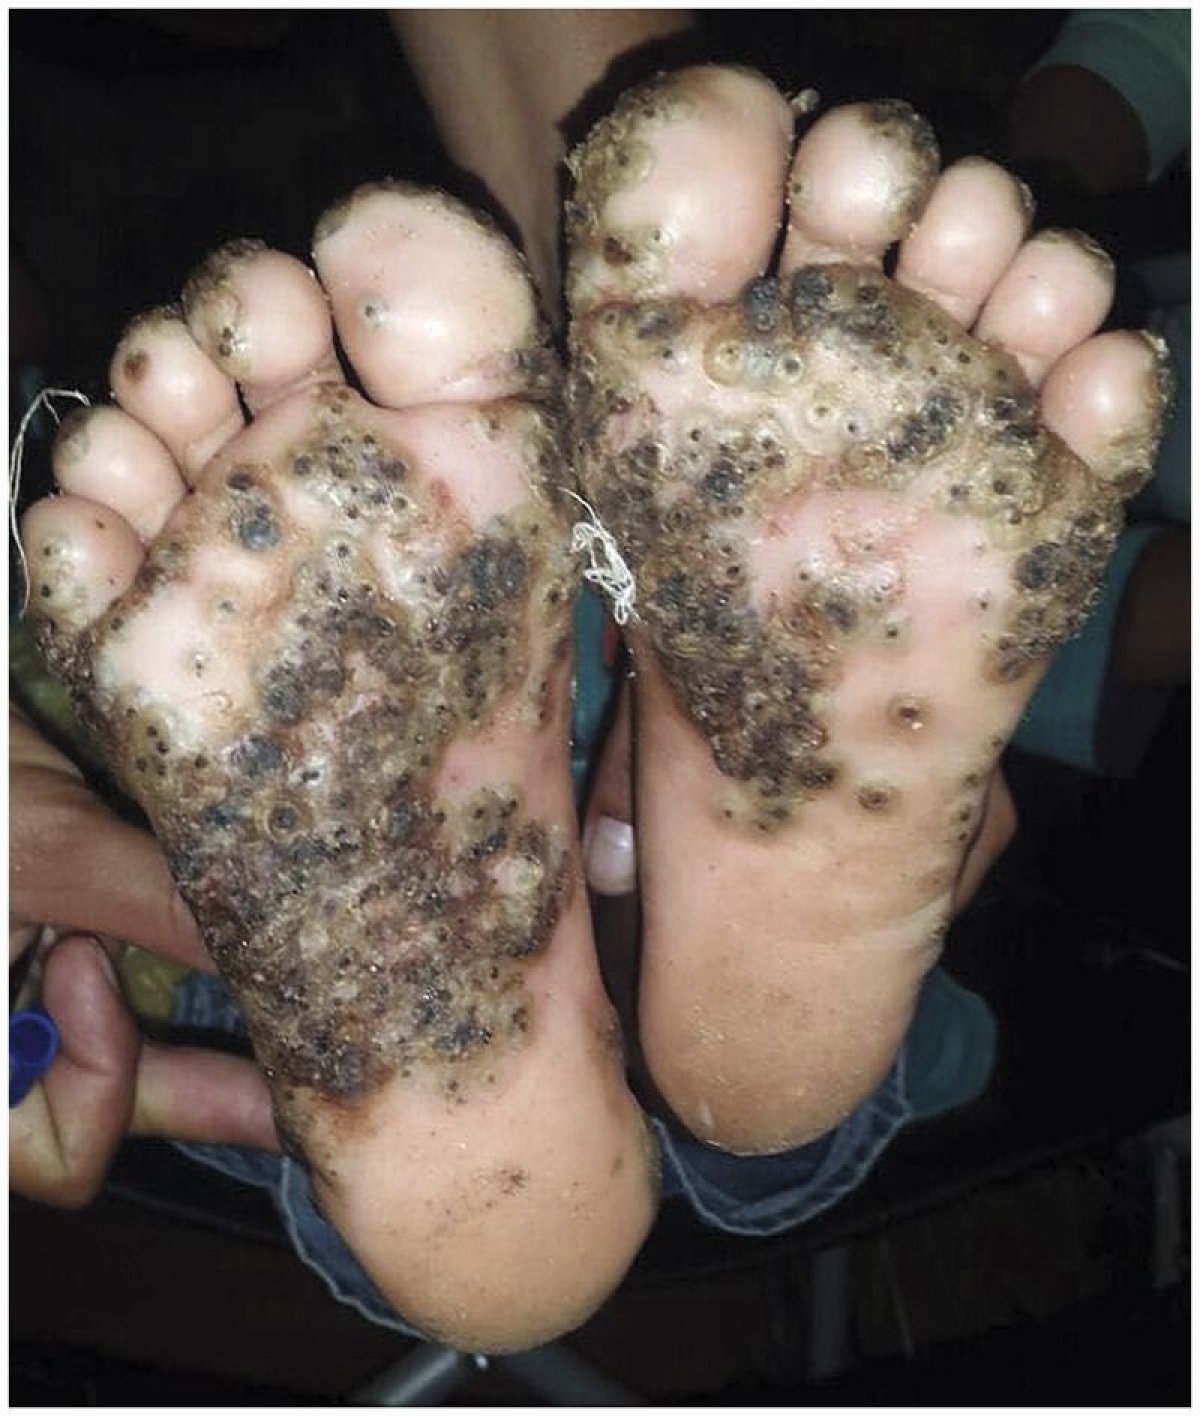 Horrific Image Shows Girl's Feet Infested With Sand Fleas After